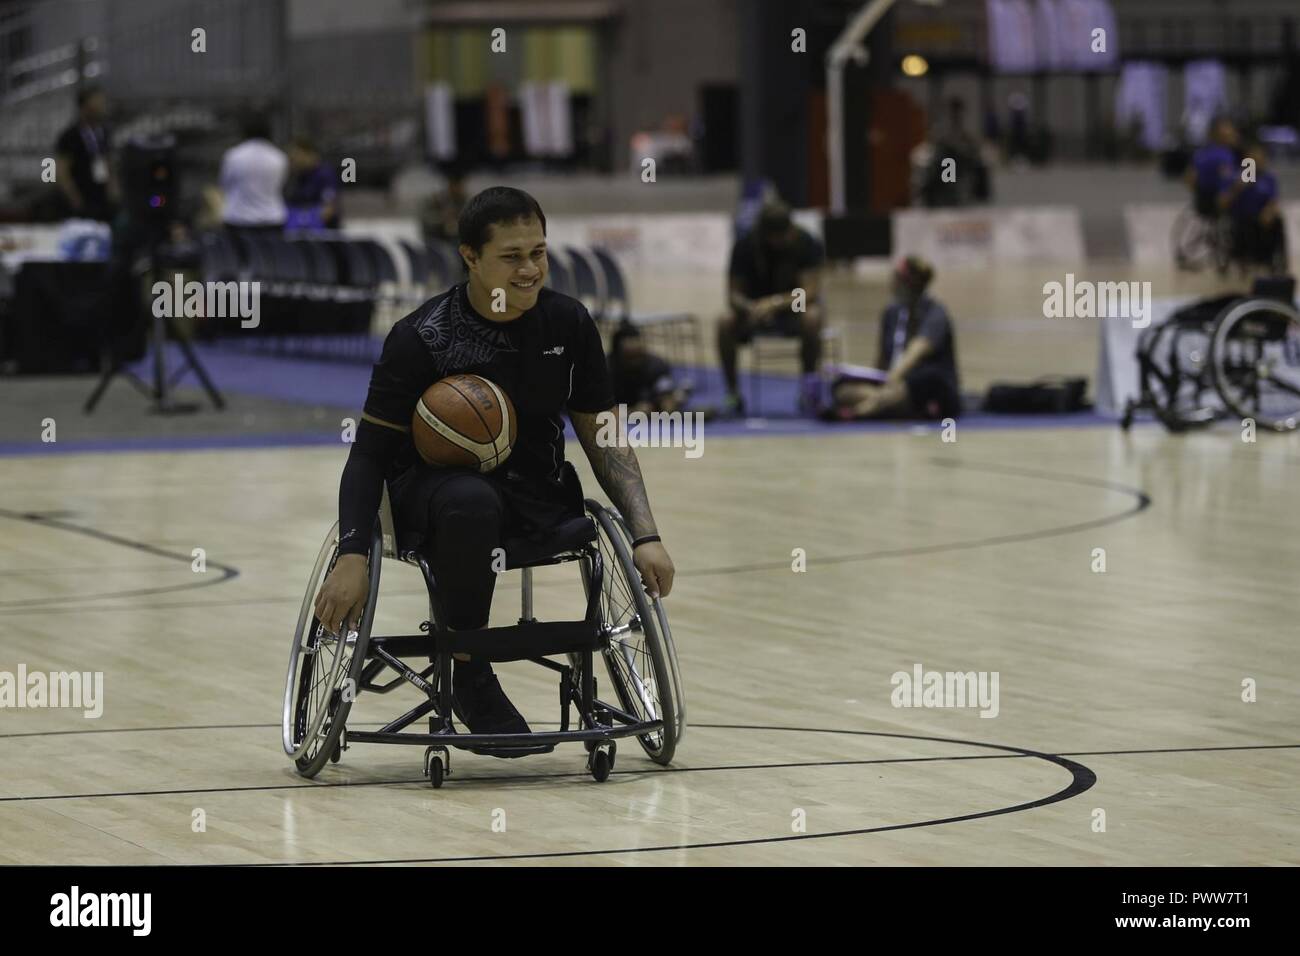 U.S. Army veteran Jarred Vaina practices wheelchair basketball for the 2017 Department of Defense Warrior Games at Chicago, Ill., June 29, 2017. The DOD Warrior Games are an annual event allowing wounded, ill and injured service members and veterans in Paralympic-style sports including archery, cycling, field, shooting, sitting volleyball, swimming, track and wheelchair basketball. Stock Photo